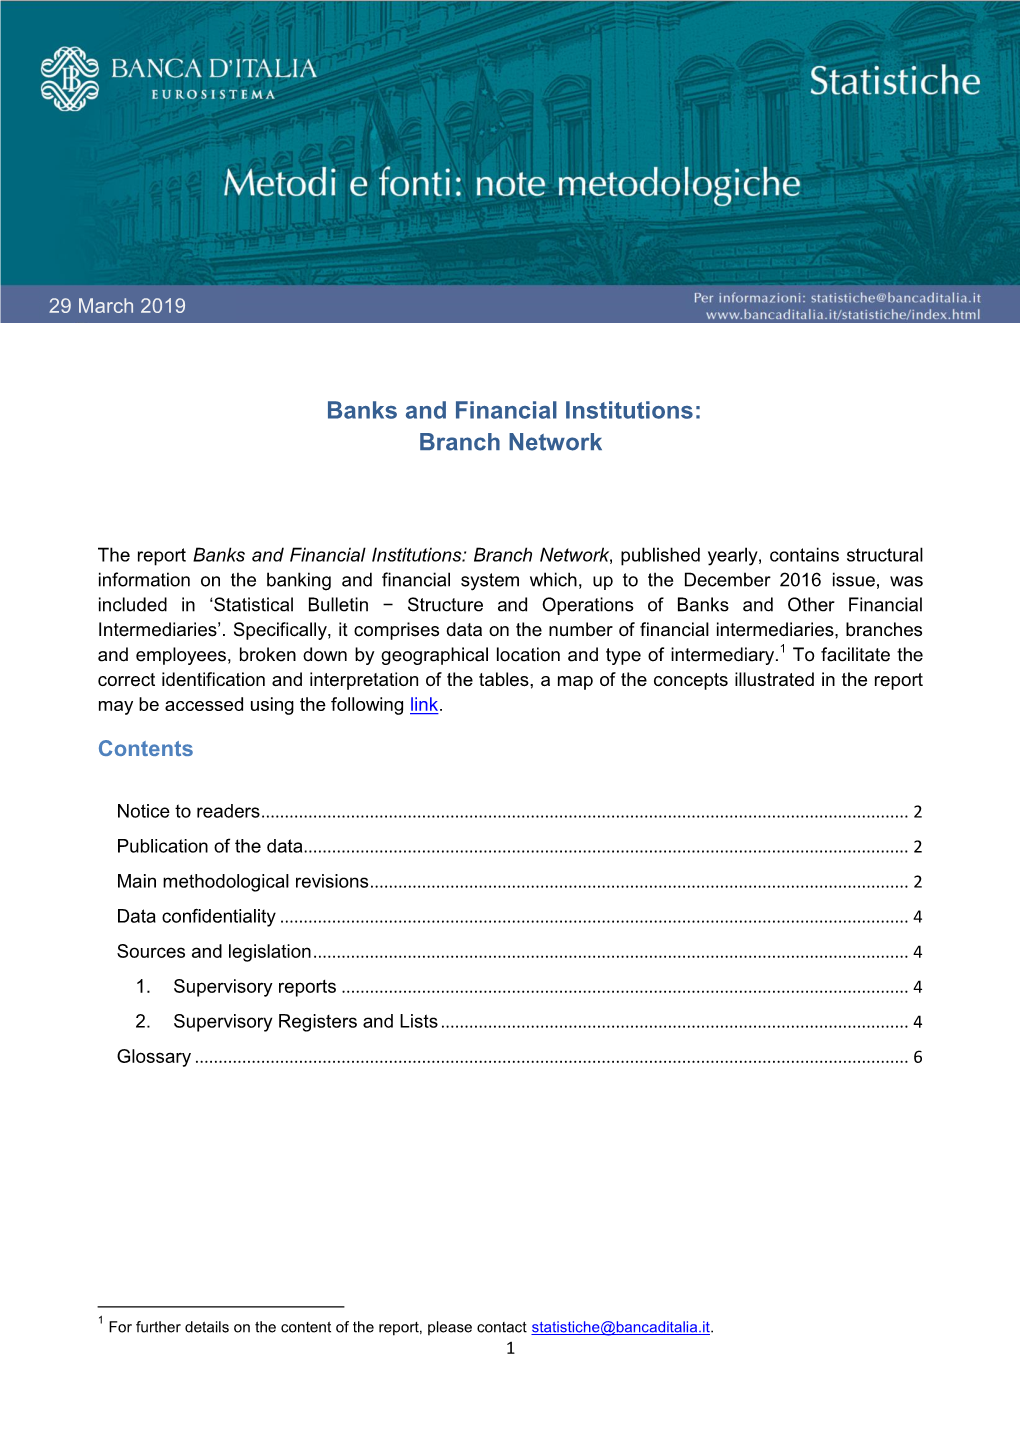 Banks and Financial Institutions: Branch Network